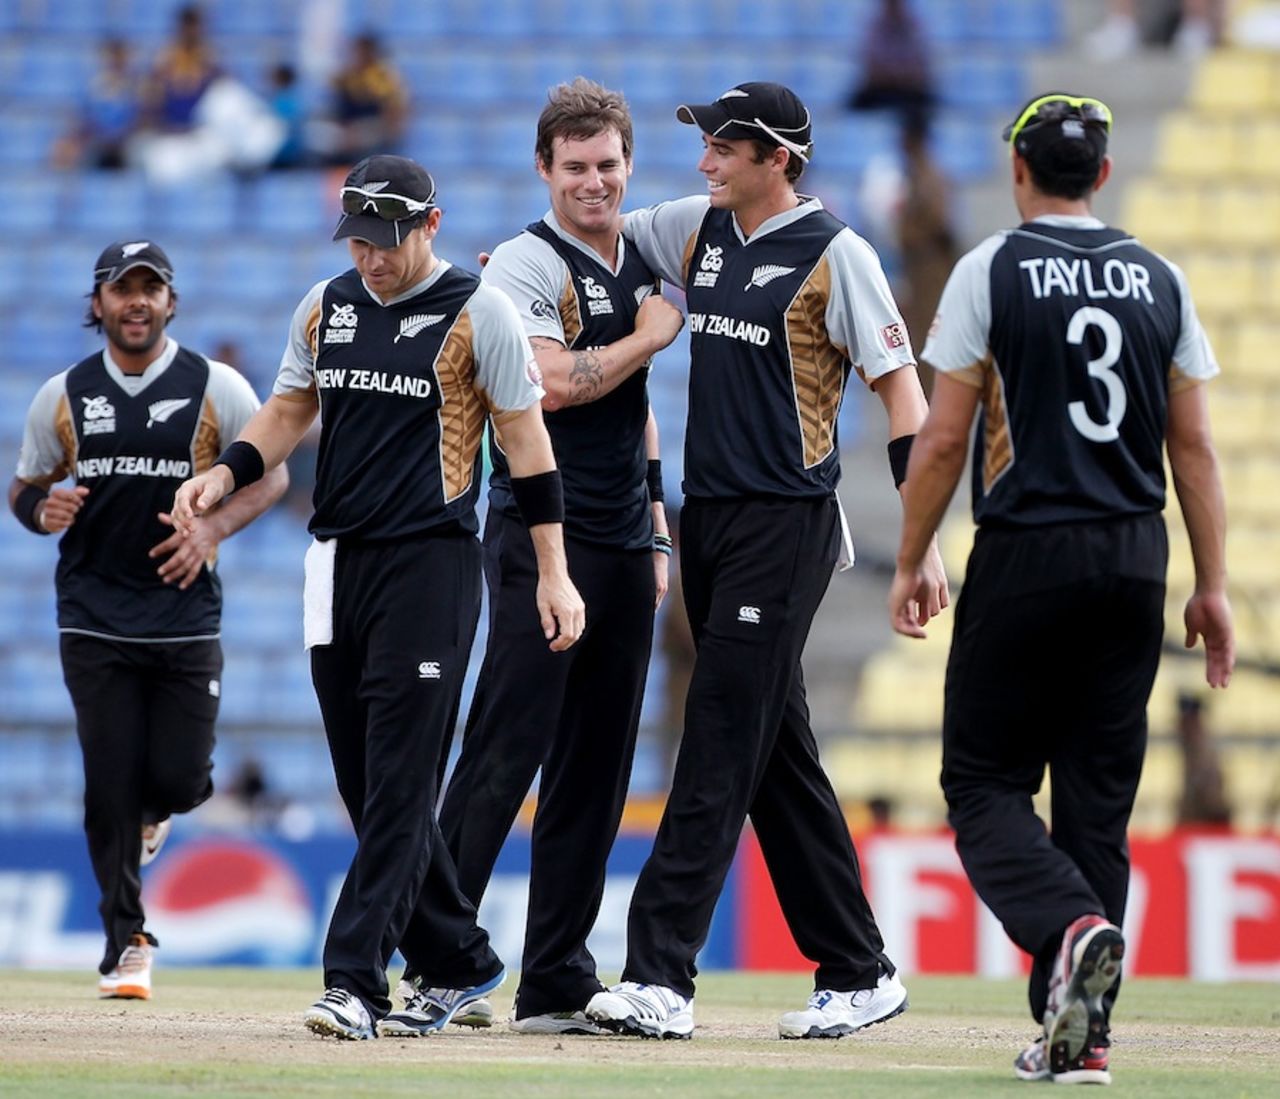 Doug Bracewell is congratulated after picking his second wicket, New Zealand v West Indies, Super Eights, World Twenty20 2012, Pallekele, October 1, 2012